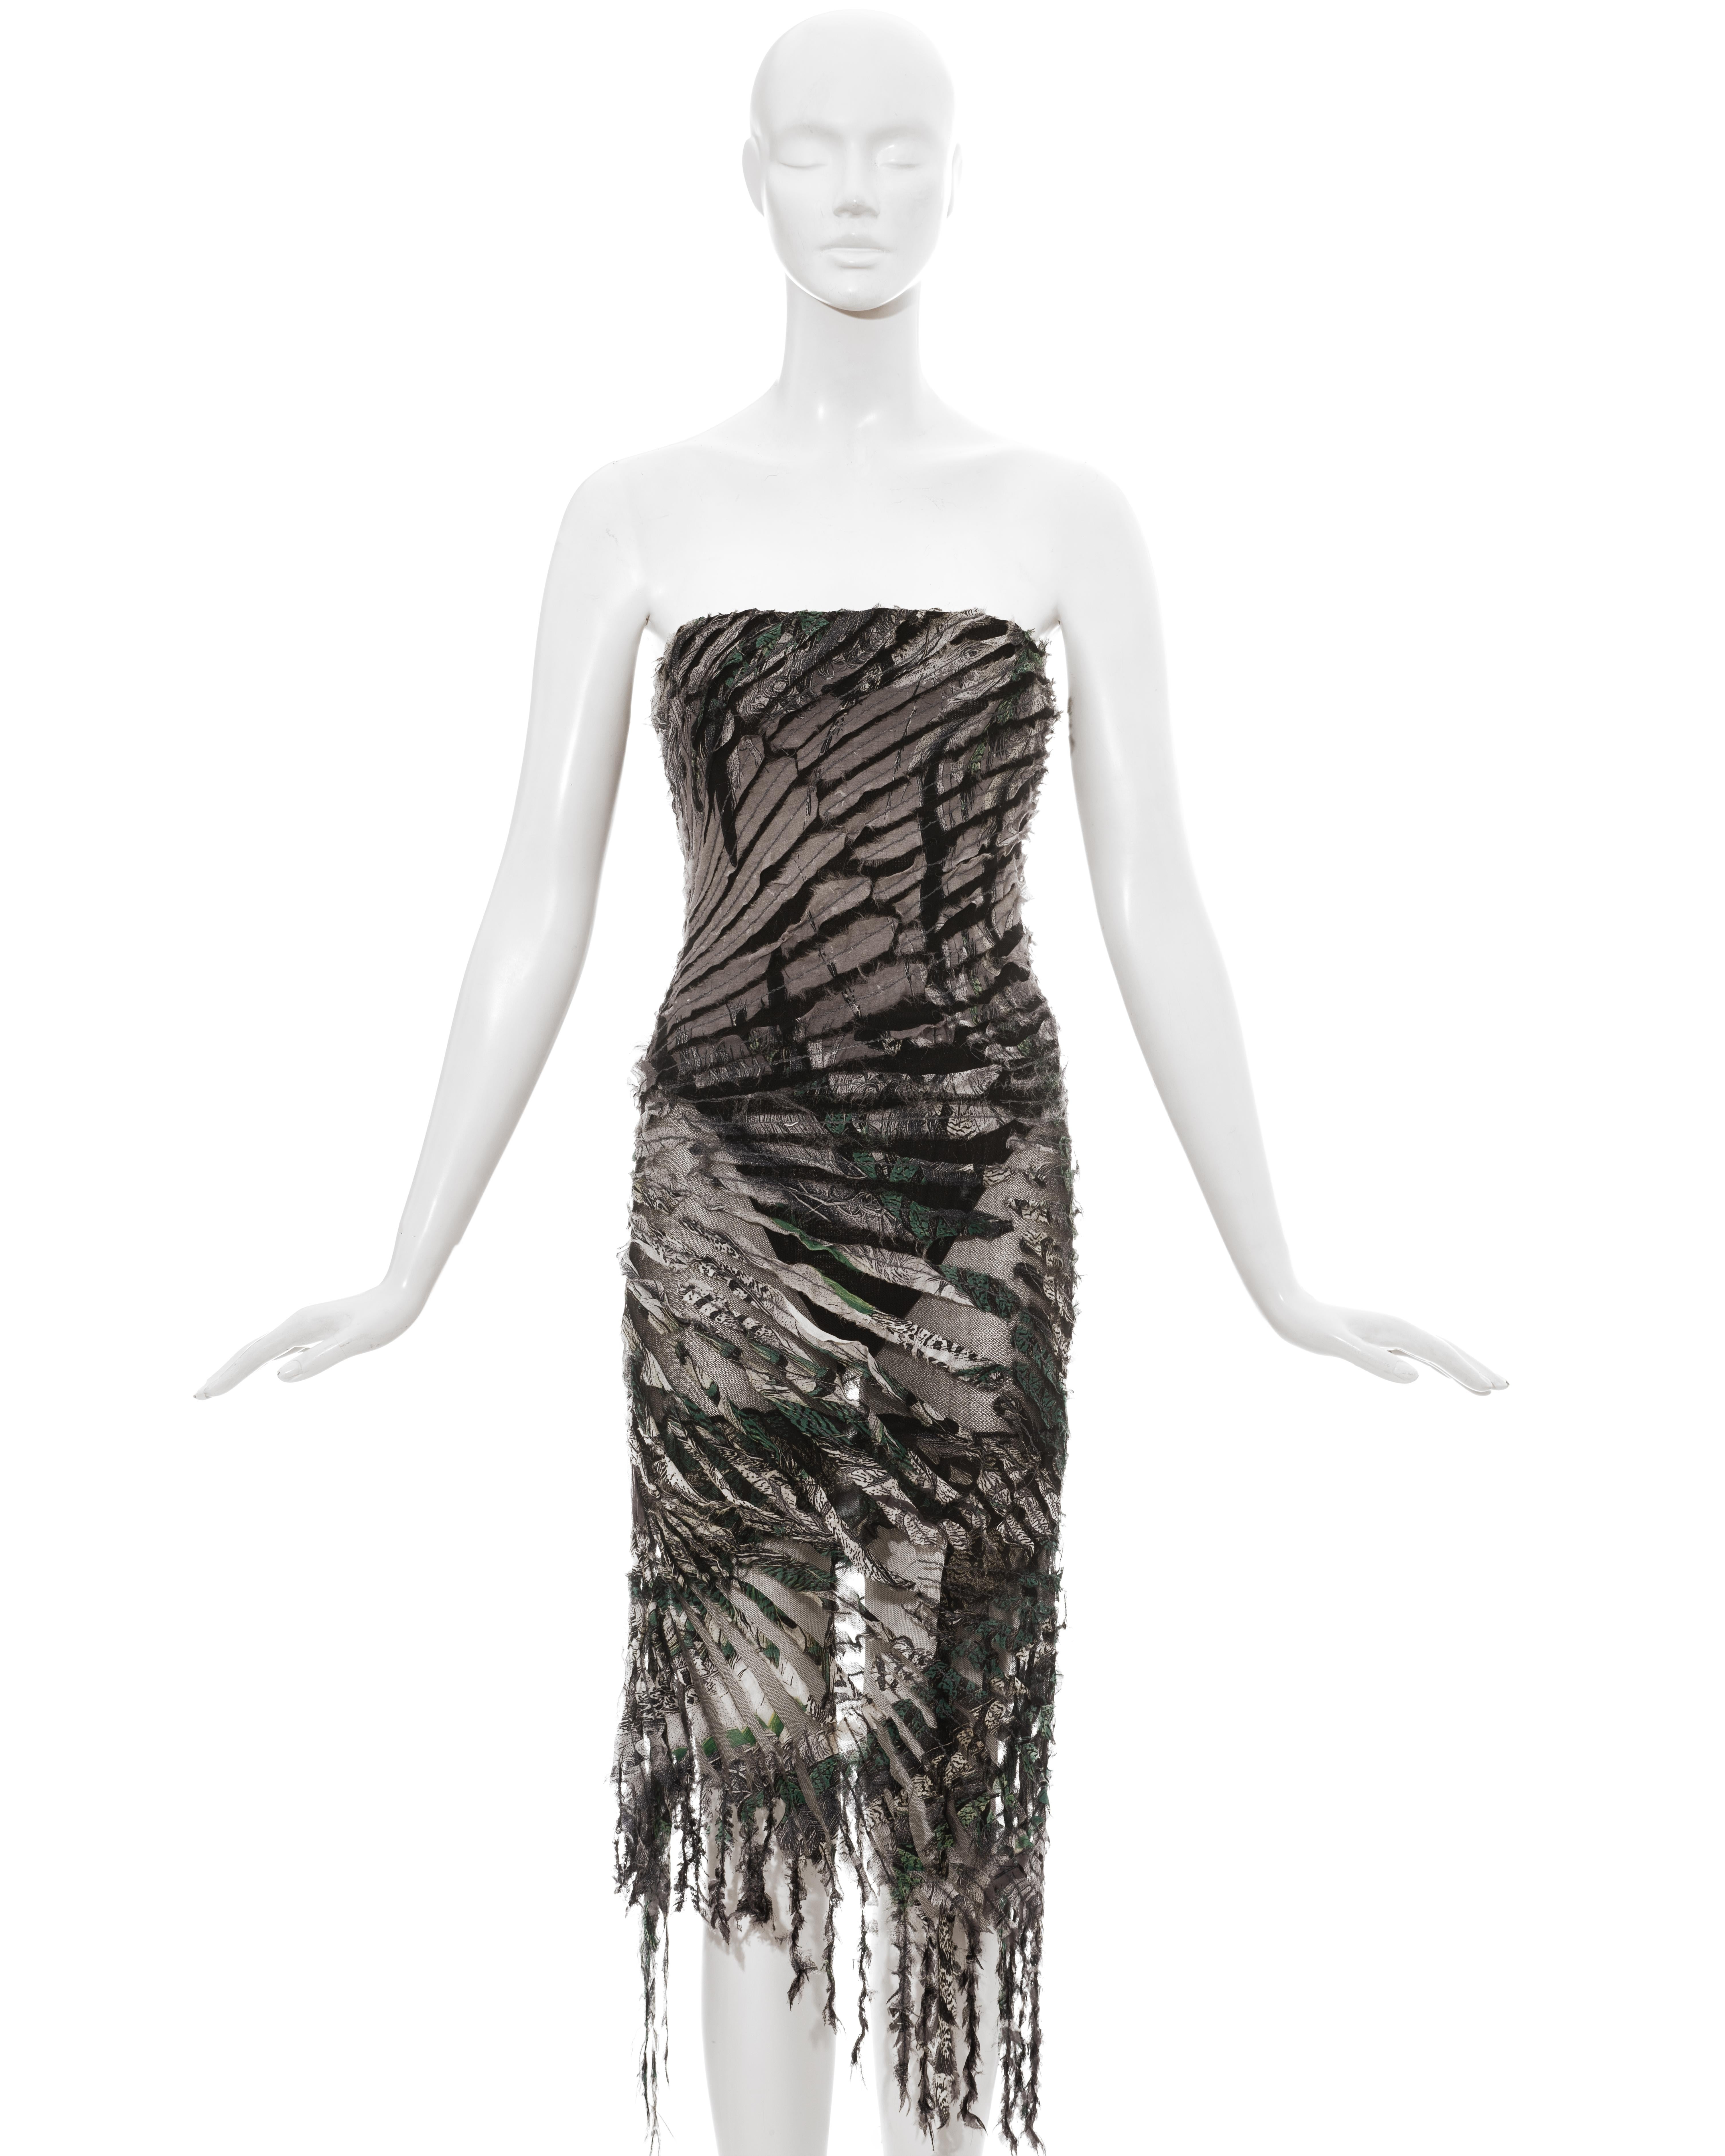 Roberto Cavalli multicoloured shredded silk and mesh evening dress with built-in corseted bodysuit. 

Fall-Winter 2001